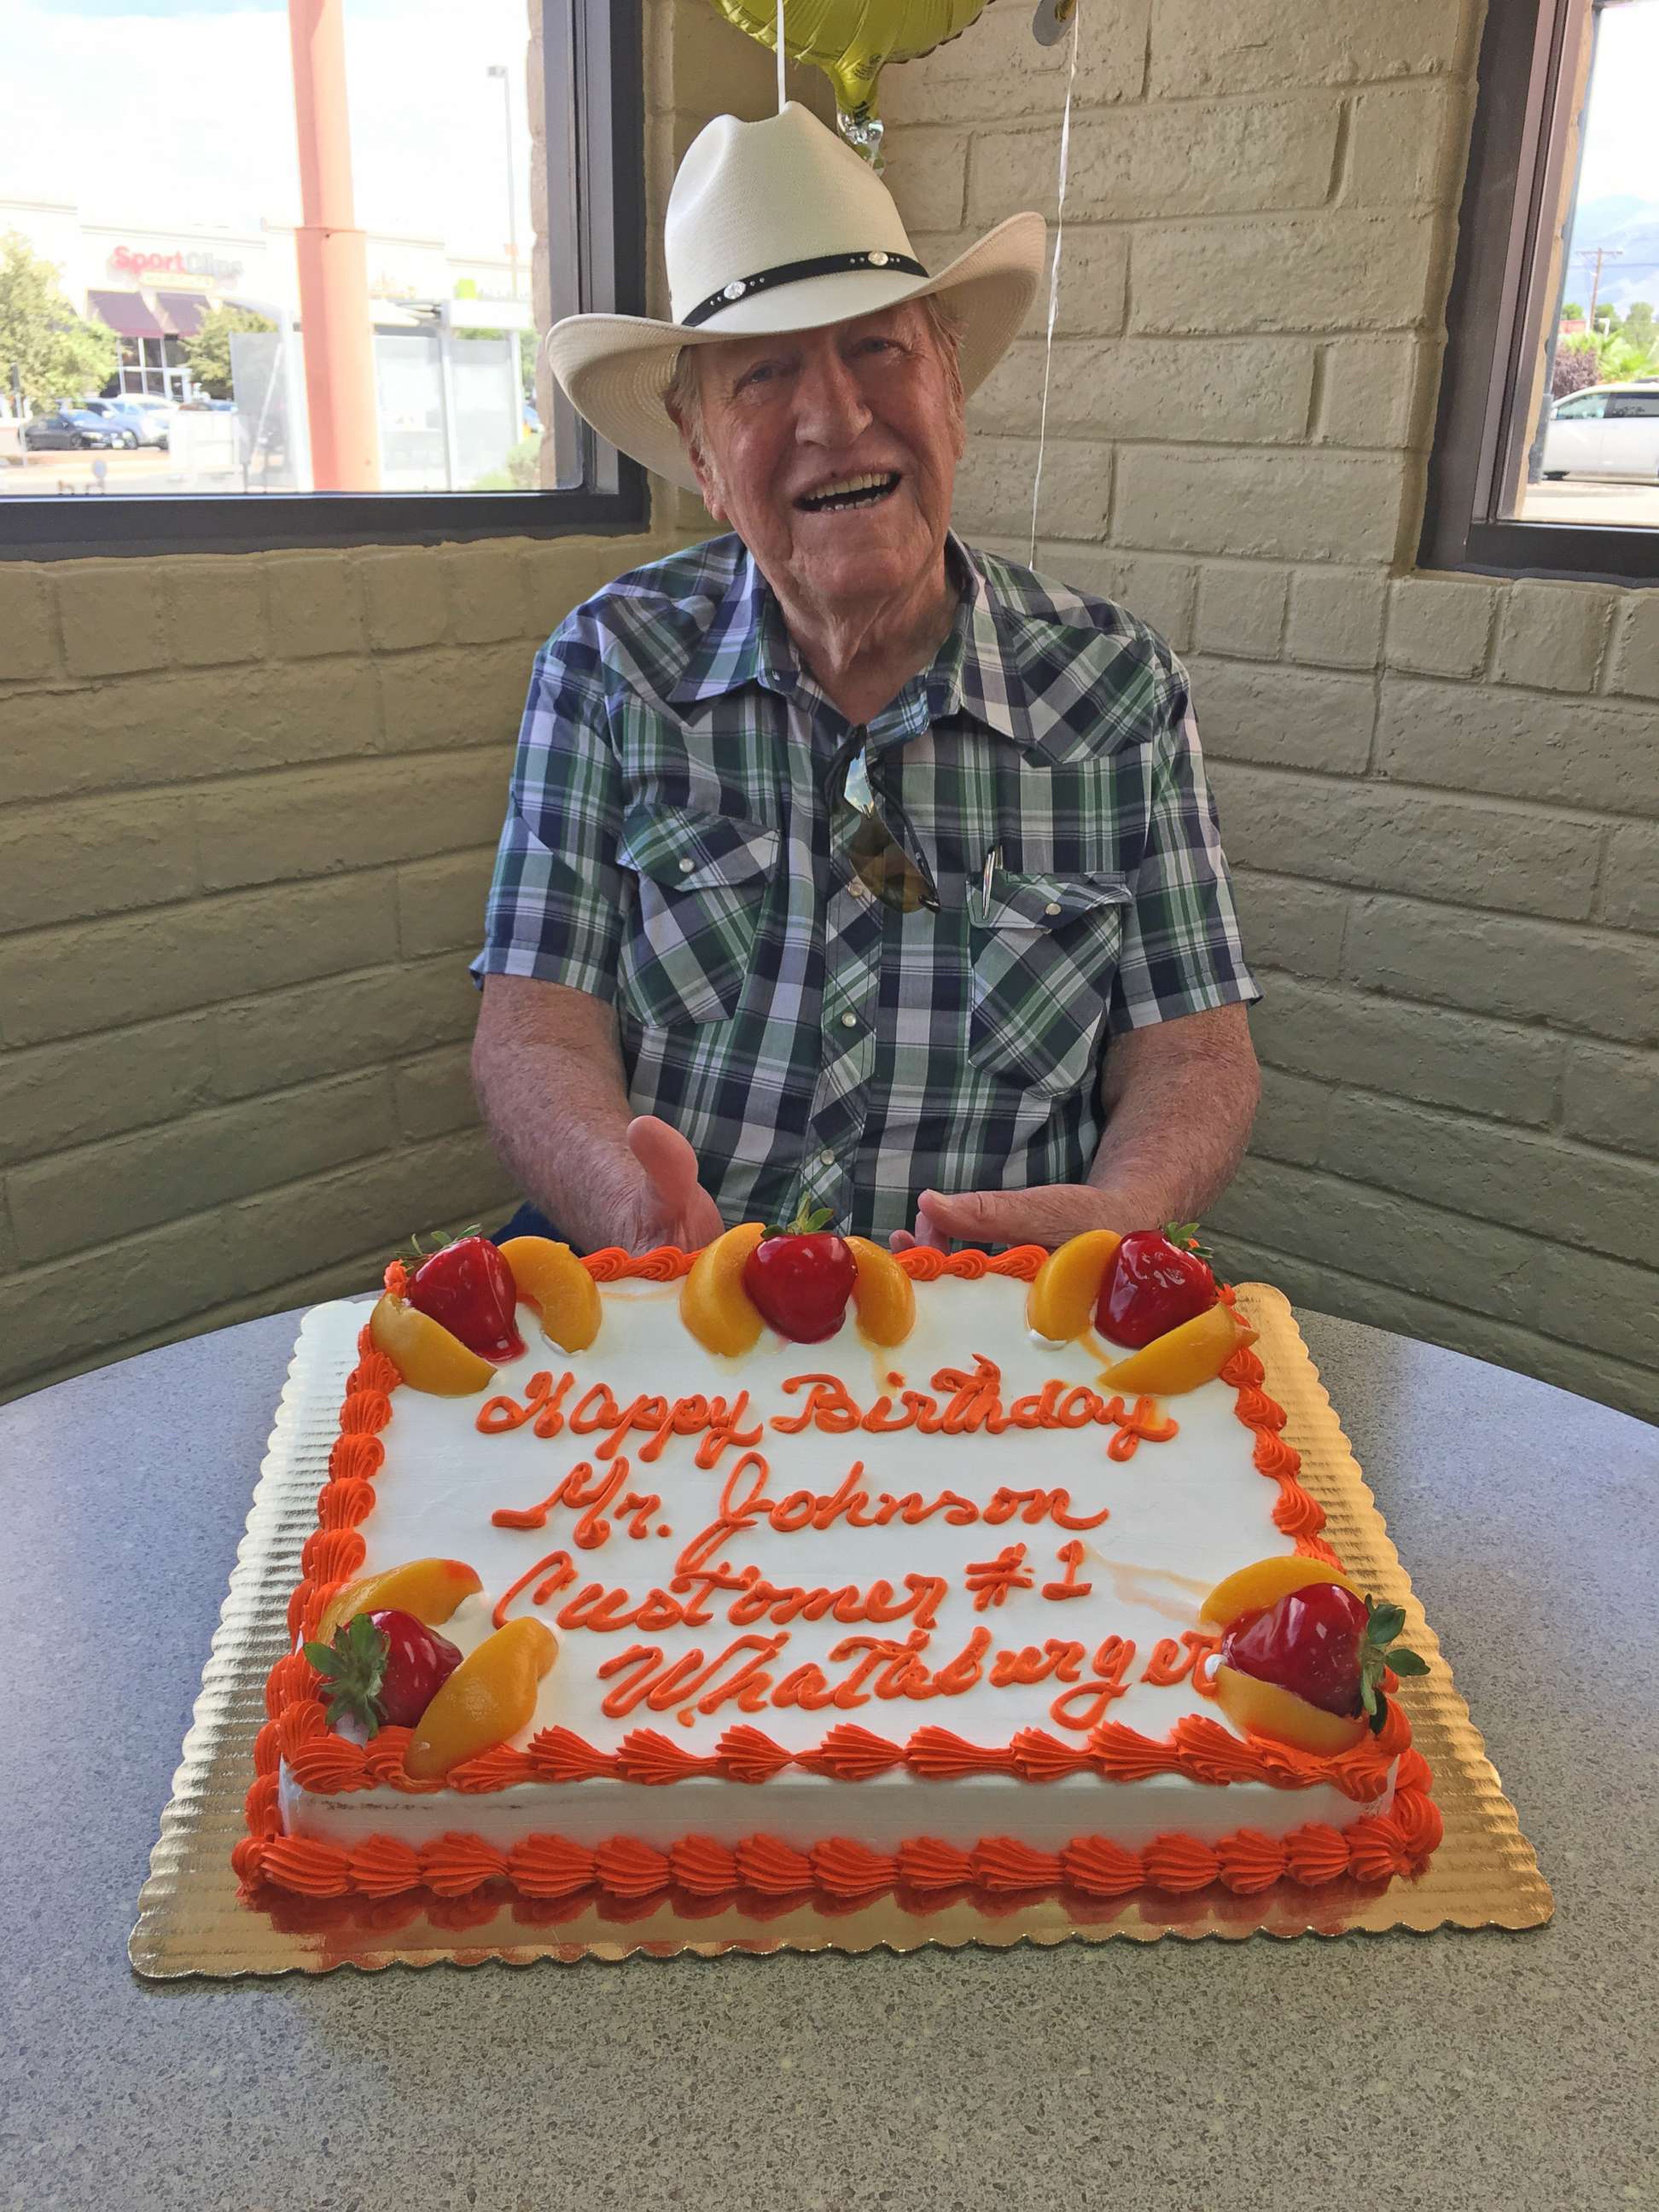 PHOTO: Ed Johnson, a loyal Whataburger customer, was surprised with balloons and cake when he arrived on his 80th birthday. 